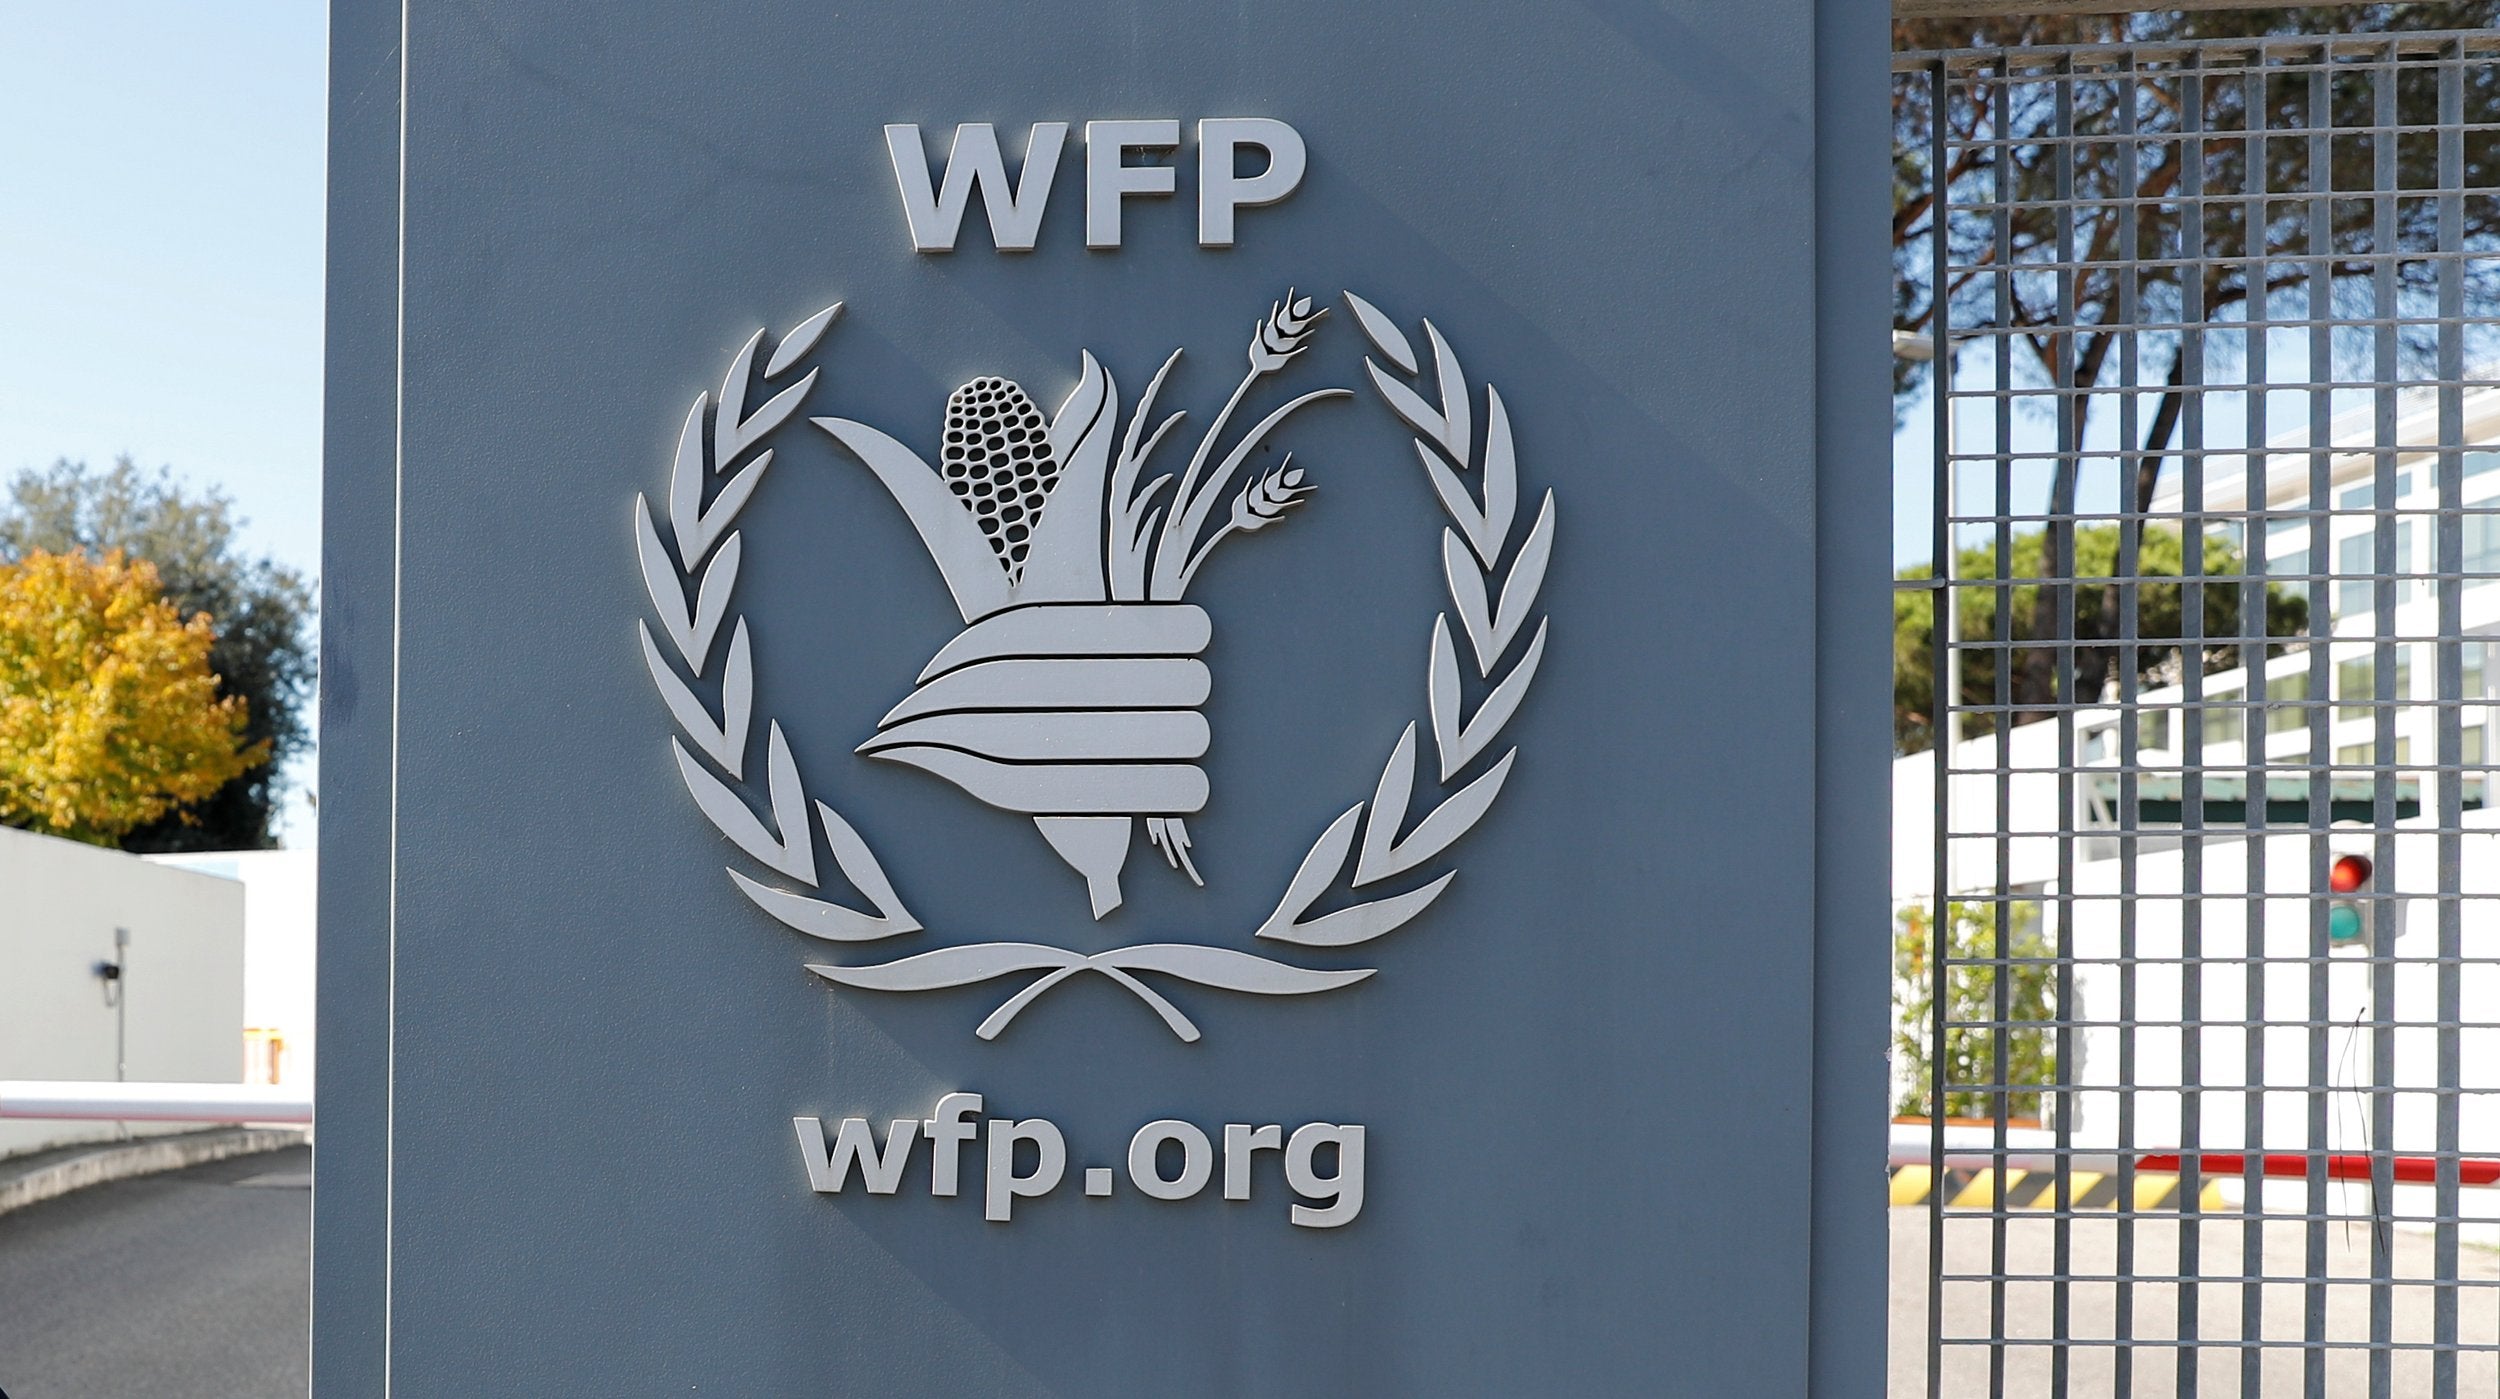 UN humanitarian flights suspended in Congo’s North-Kivu and Ituri provinces, WFP says